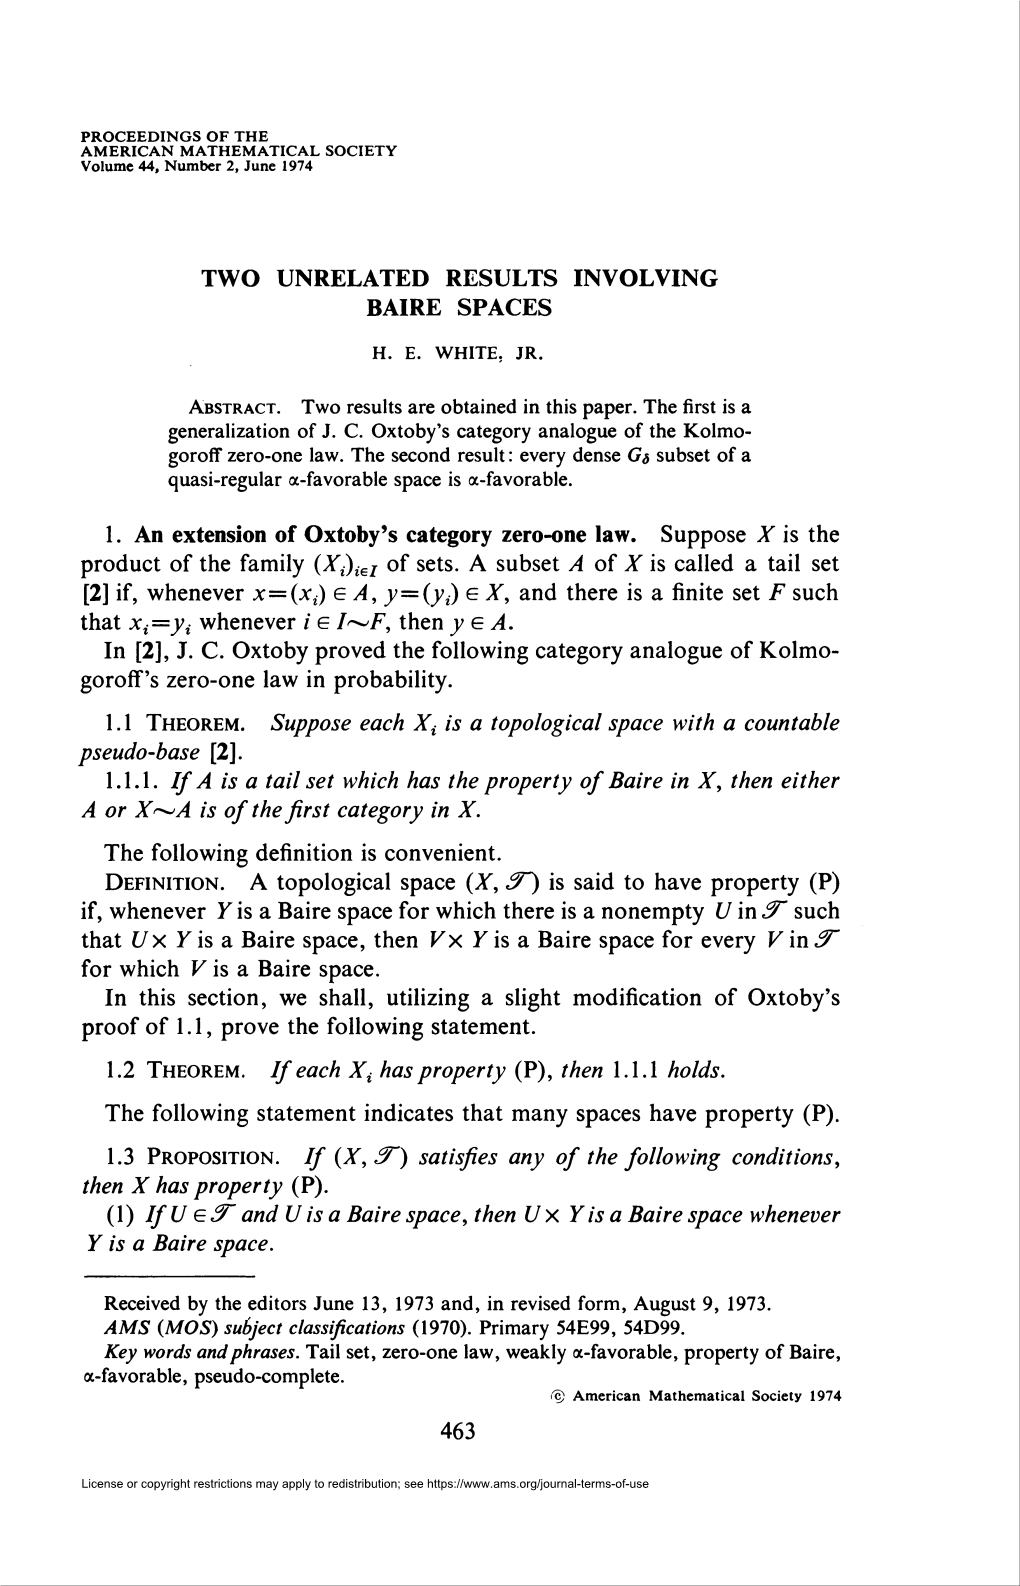 Two Unrelated Results Involving Baire Spaces